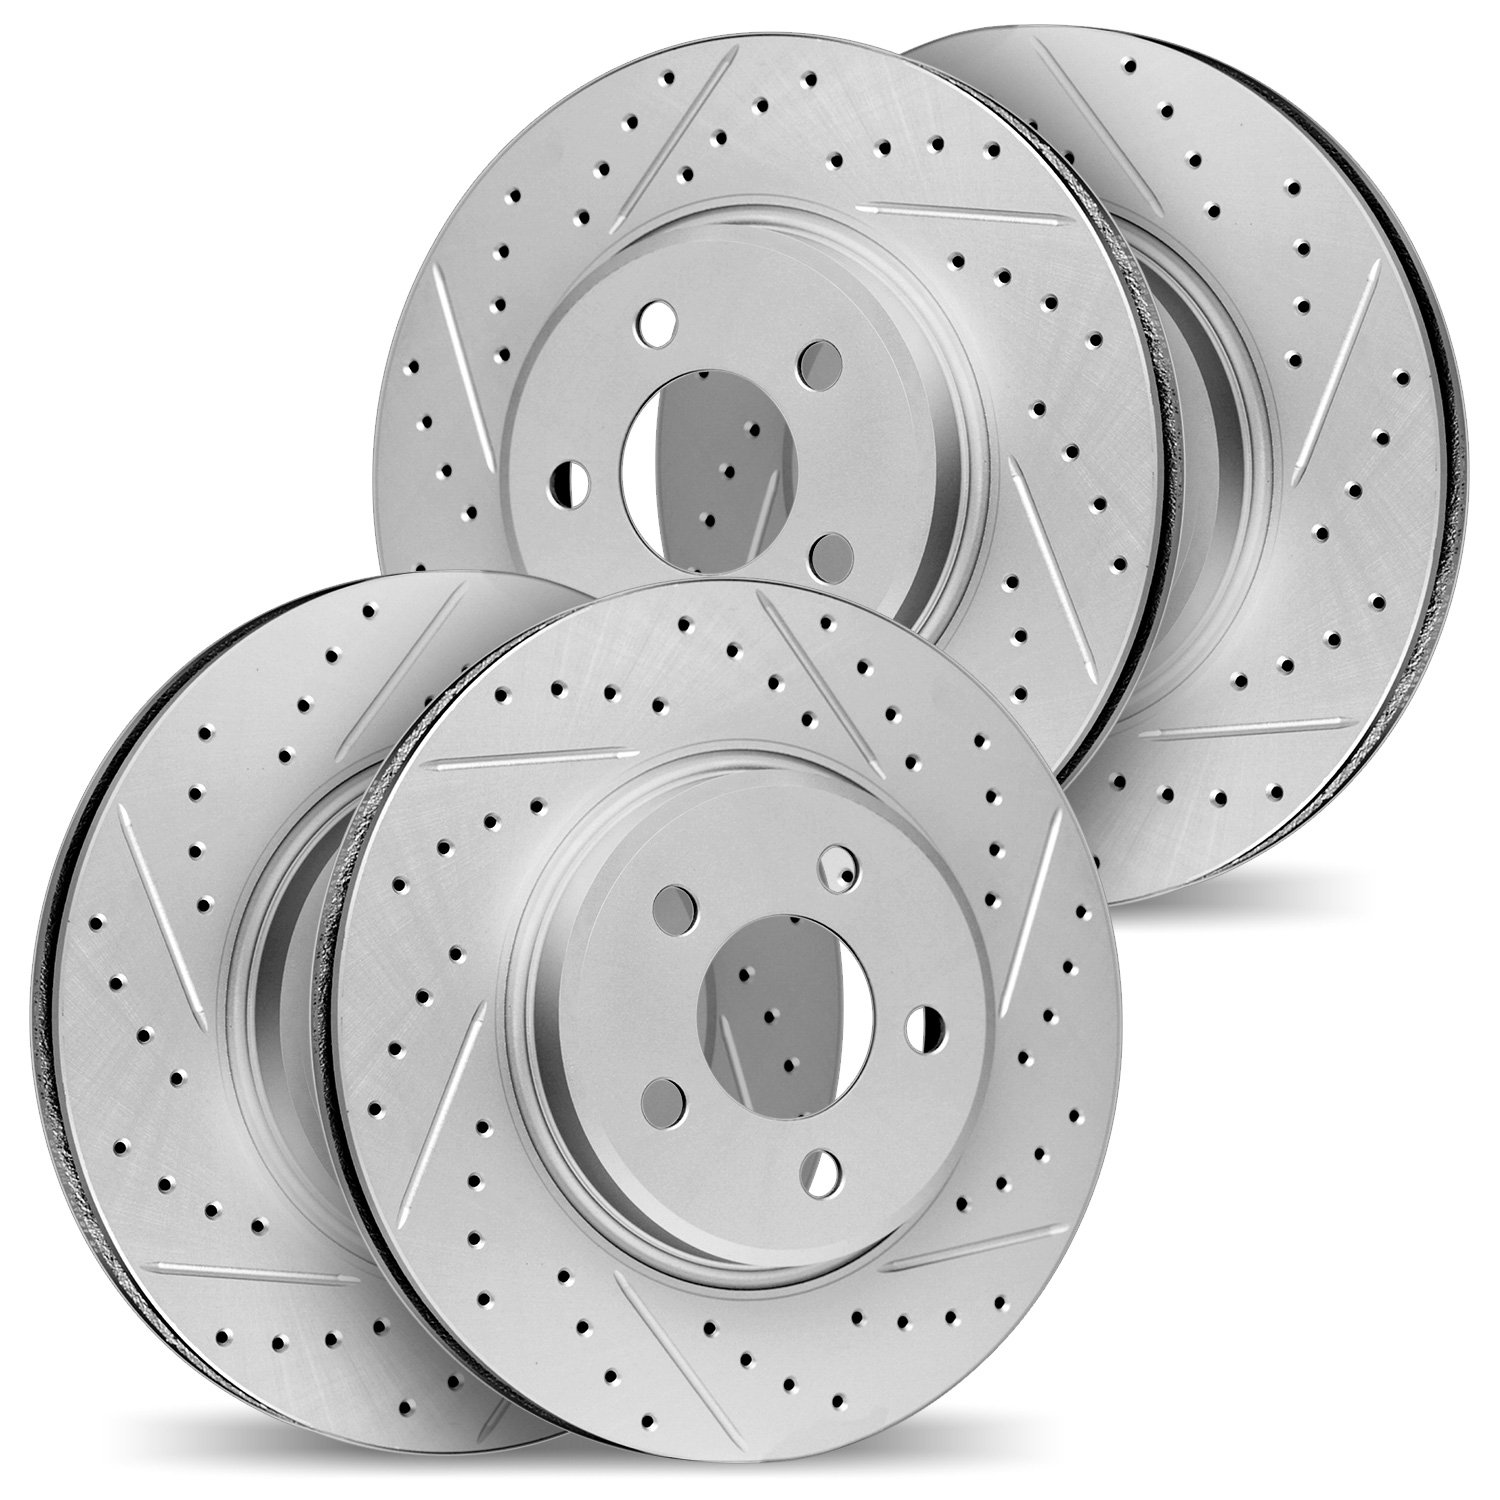 2004-63043 Geoperformance Drilled/Slotted Brake Rotors, Fits Select Mercedes-Benz, Position: Front and Rear